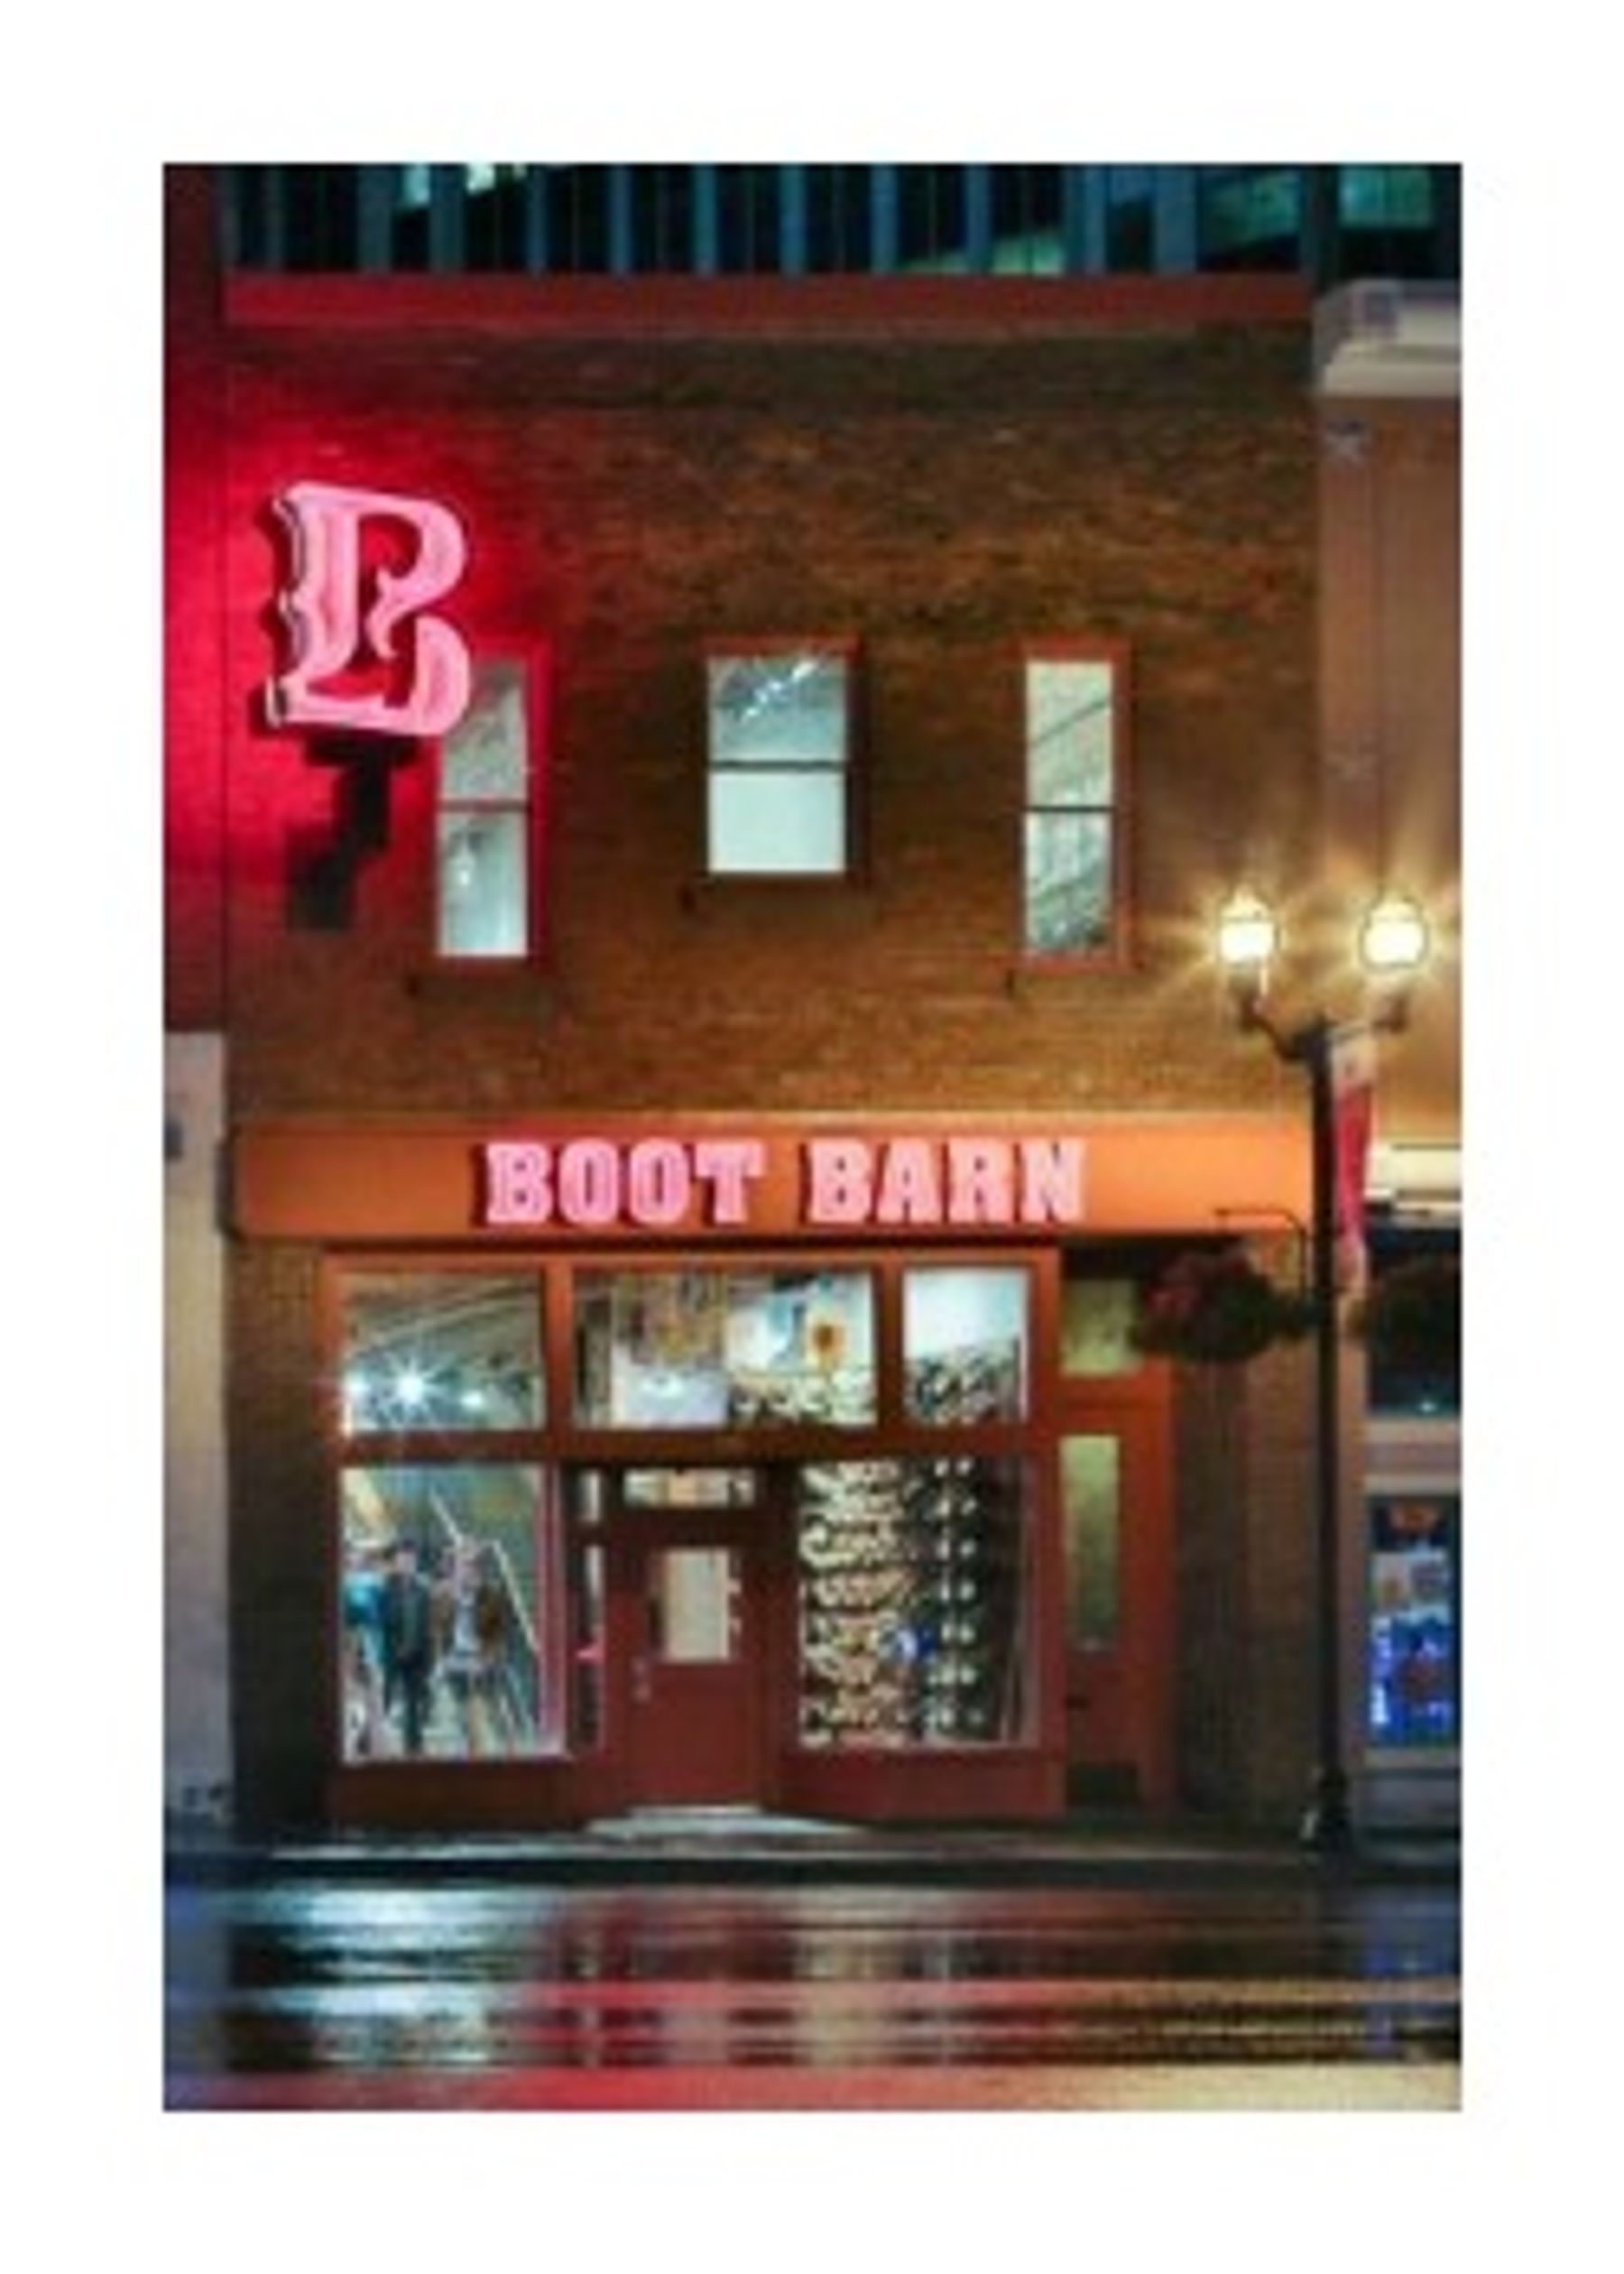 Boot Barn to open store on East University Drive